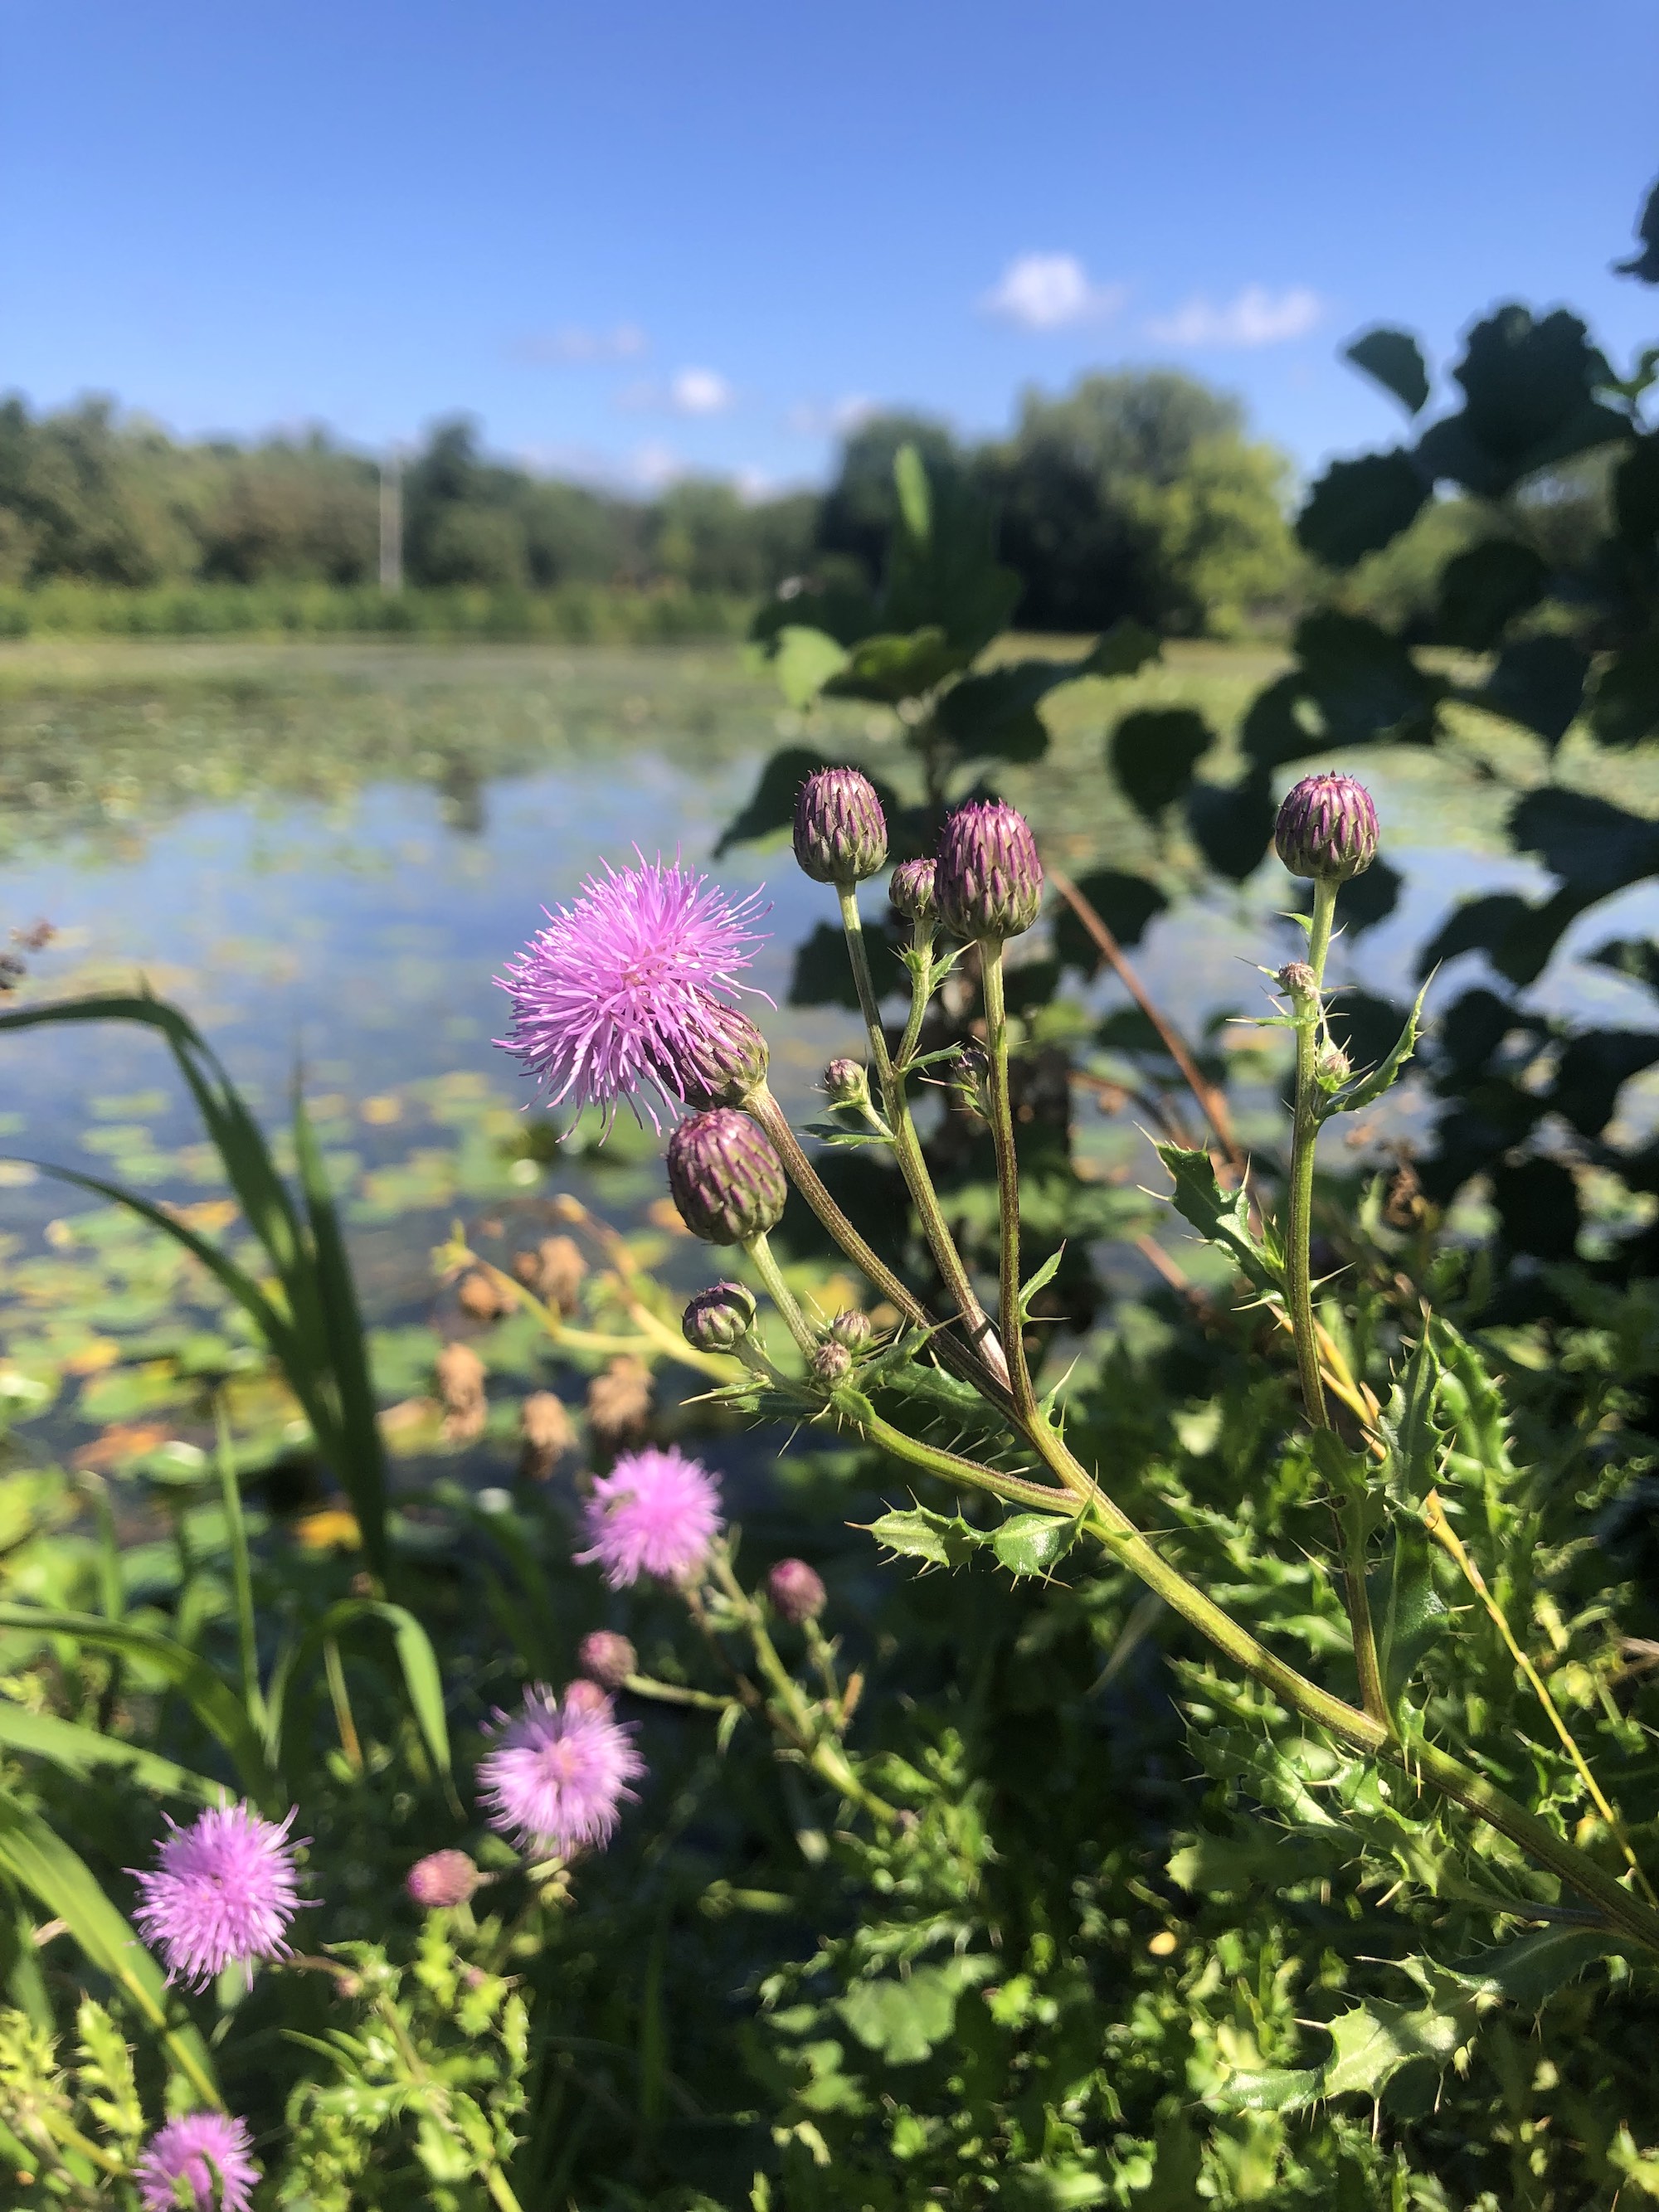 Canada Thistle on the shore of Vilas Park Lagoon in Vilas Park in Madison, Wisconsin on August 26, 2022.